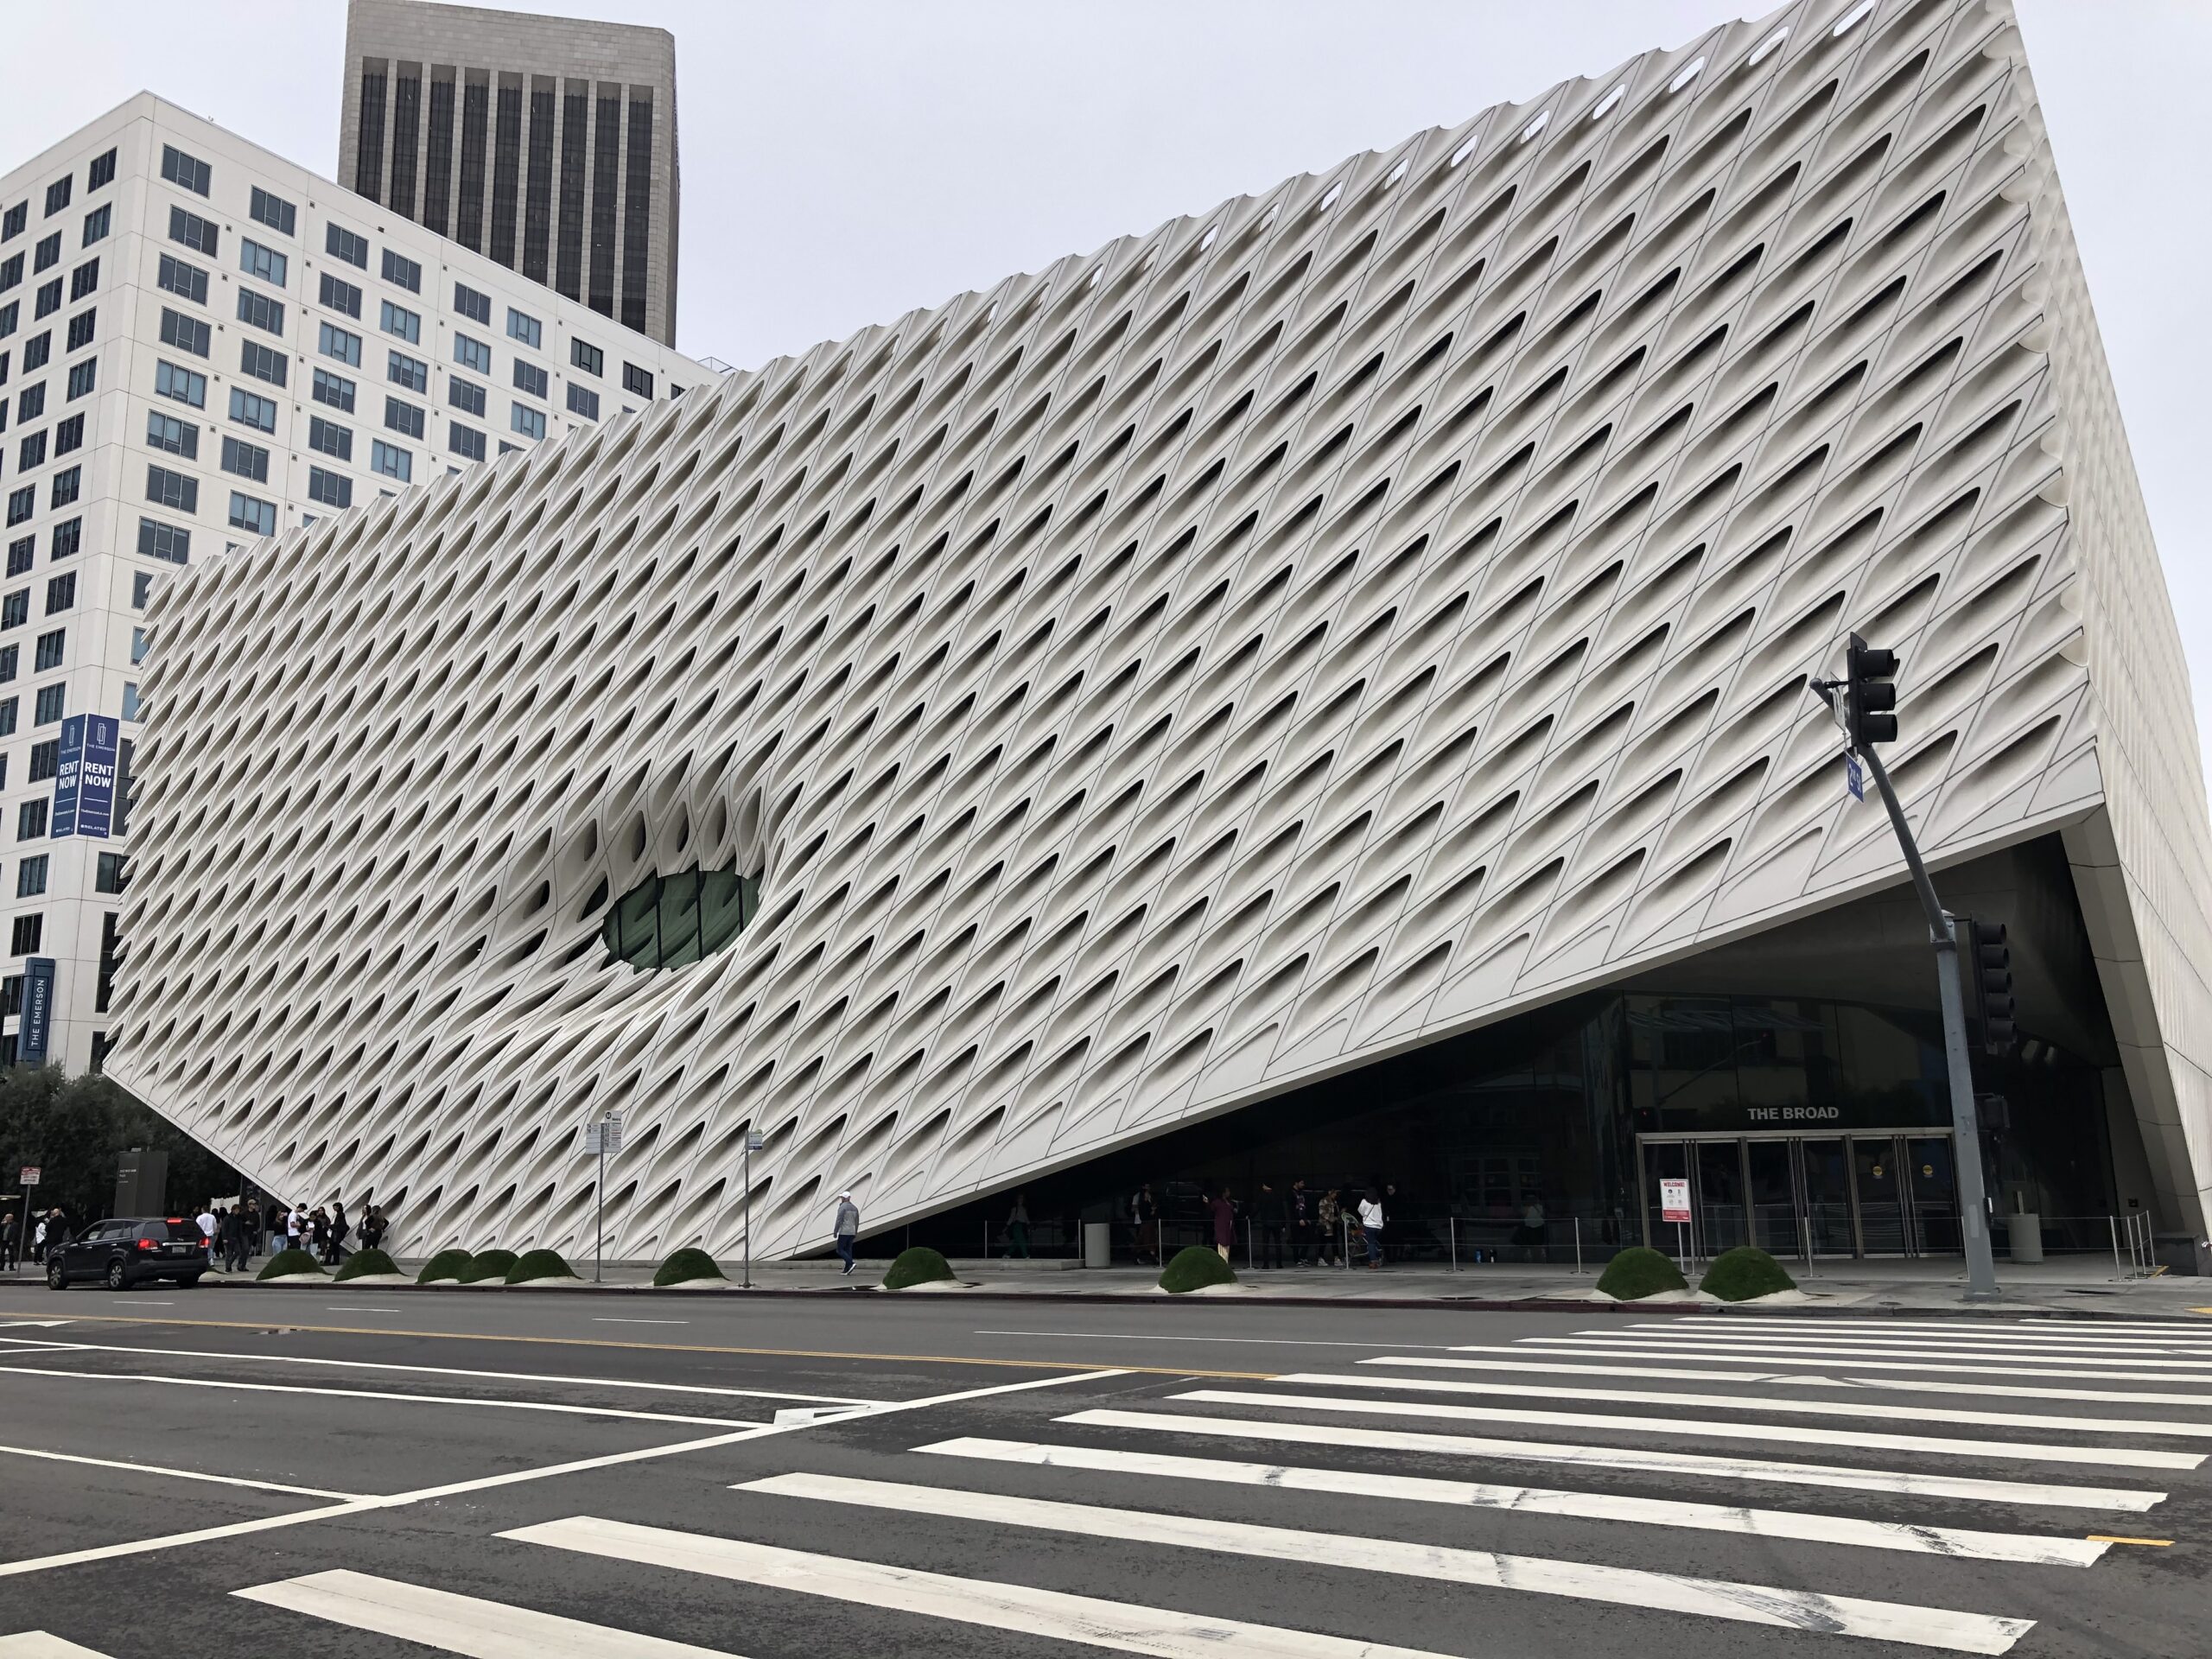 The Broad (street view)